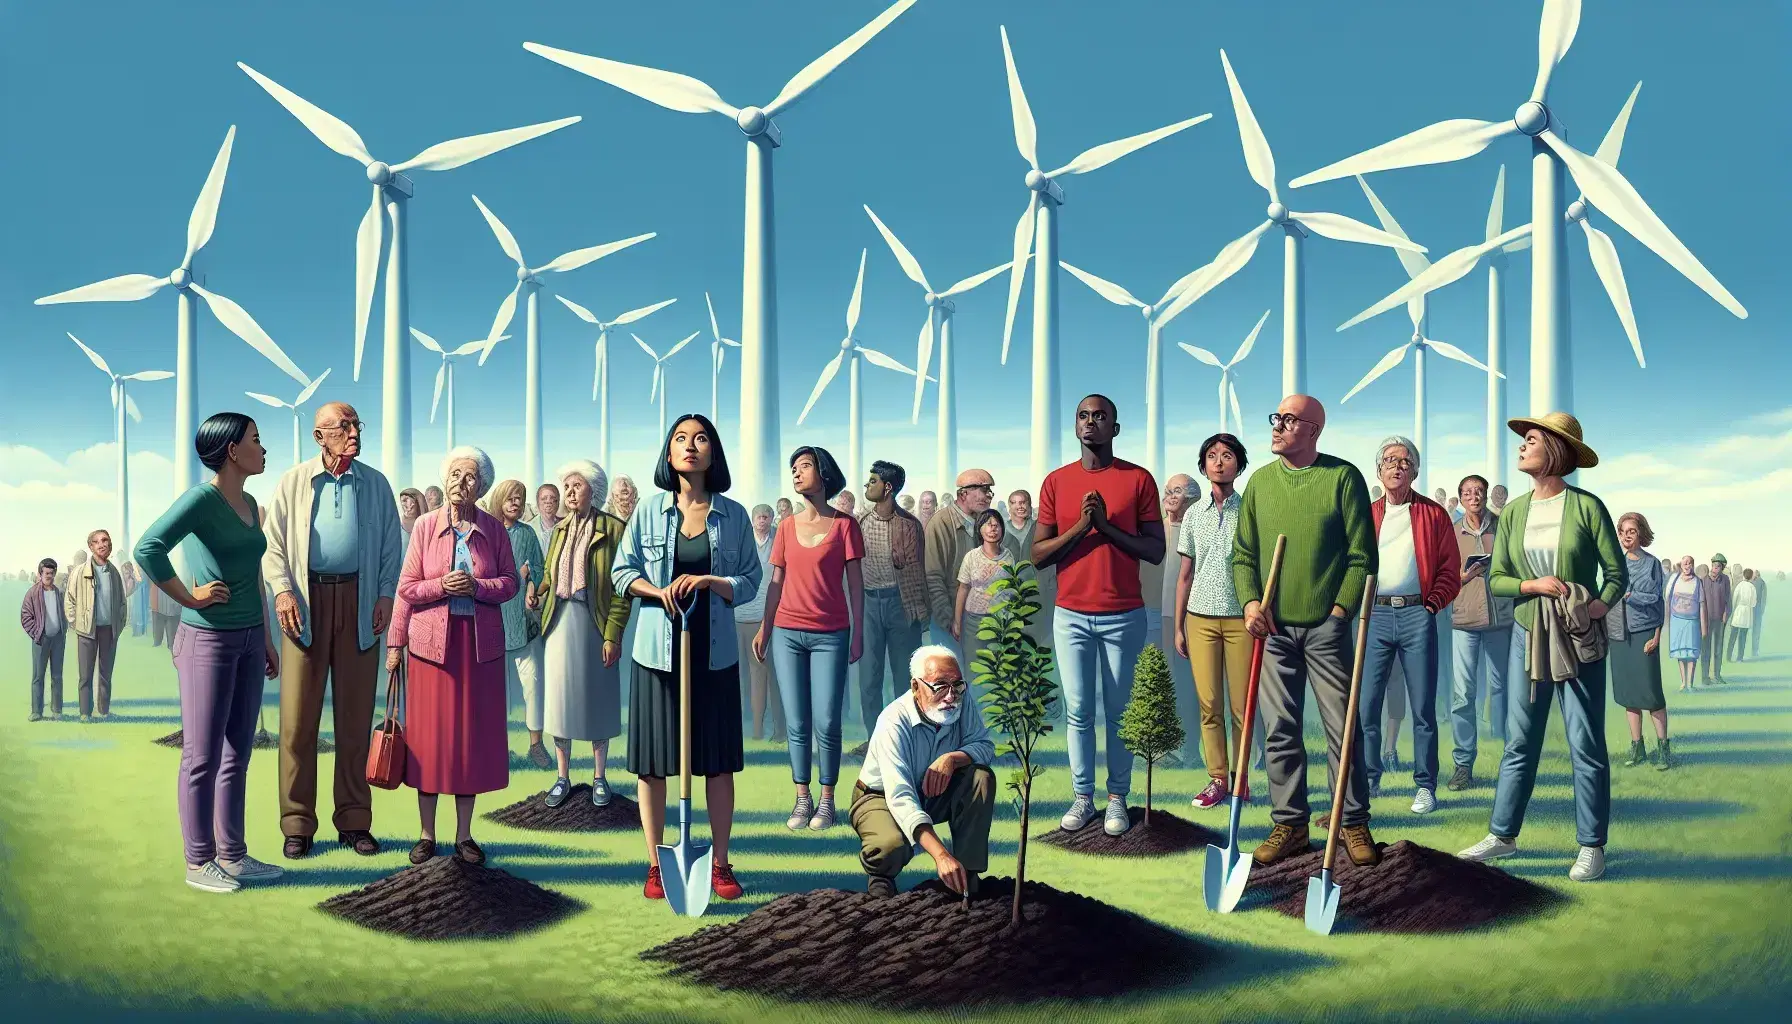 Multiethnic and intergenerational group in green field with wind turbines, planting trees under blue sky with scattered clouds.